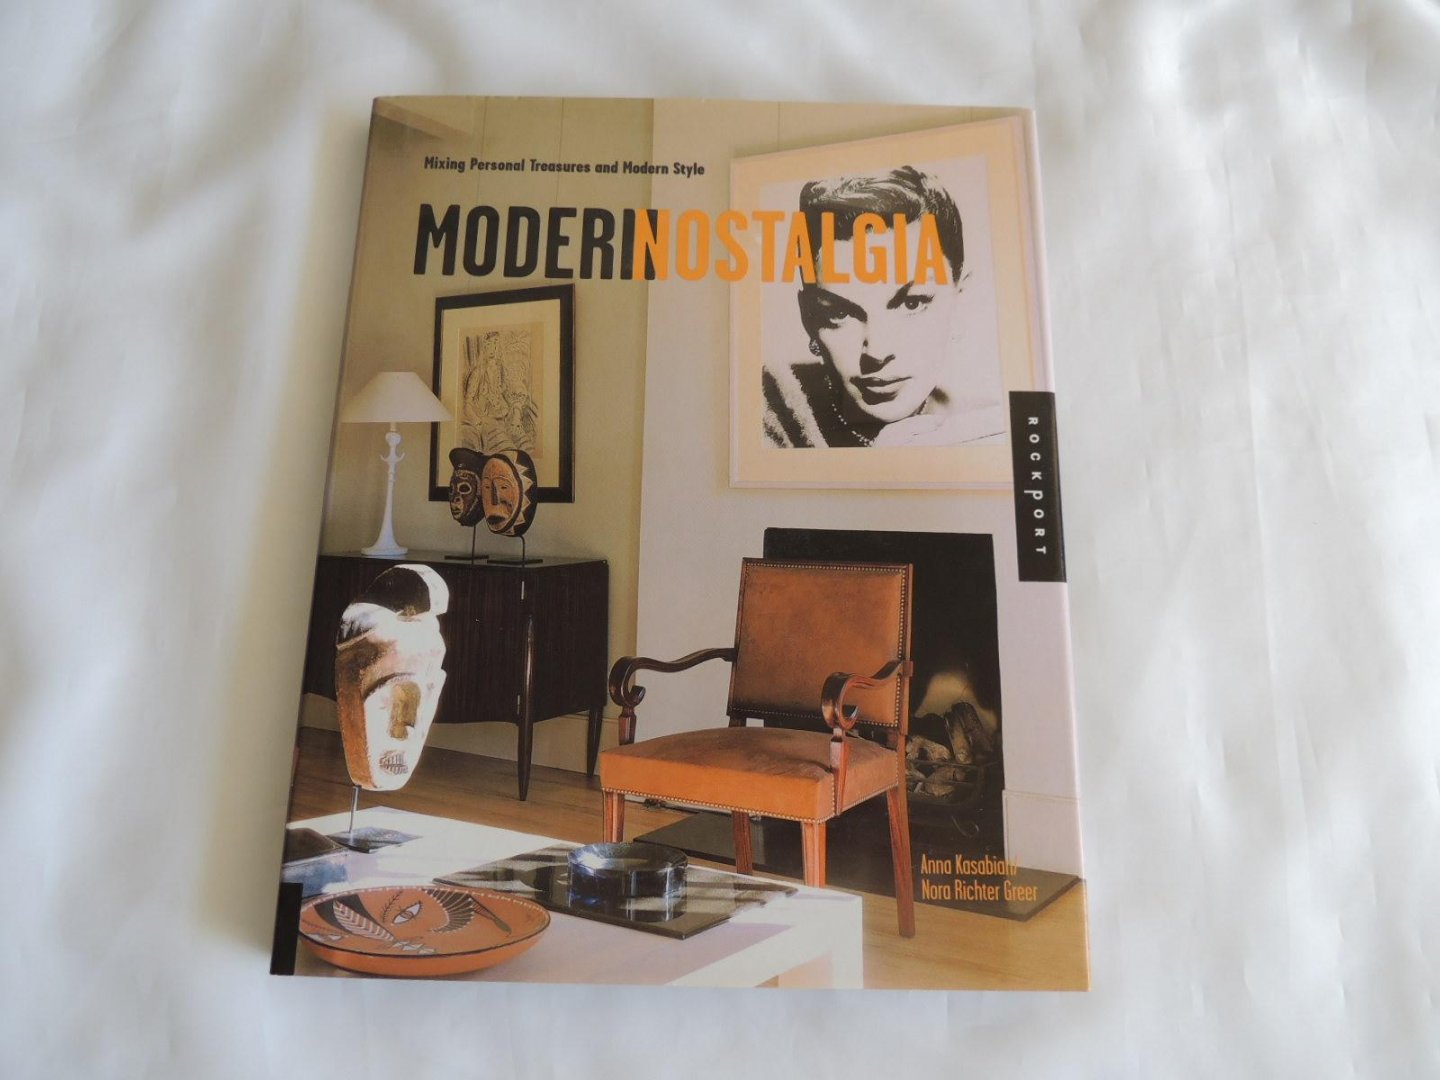 Anna Kasabian, Nora Richter Greer - Modern nostalgia : mixing personal treasures and modern style - Modernnostalgia - Modernostalgia - Modern nostalgie